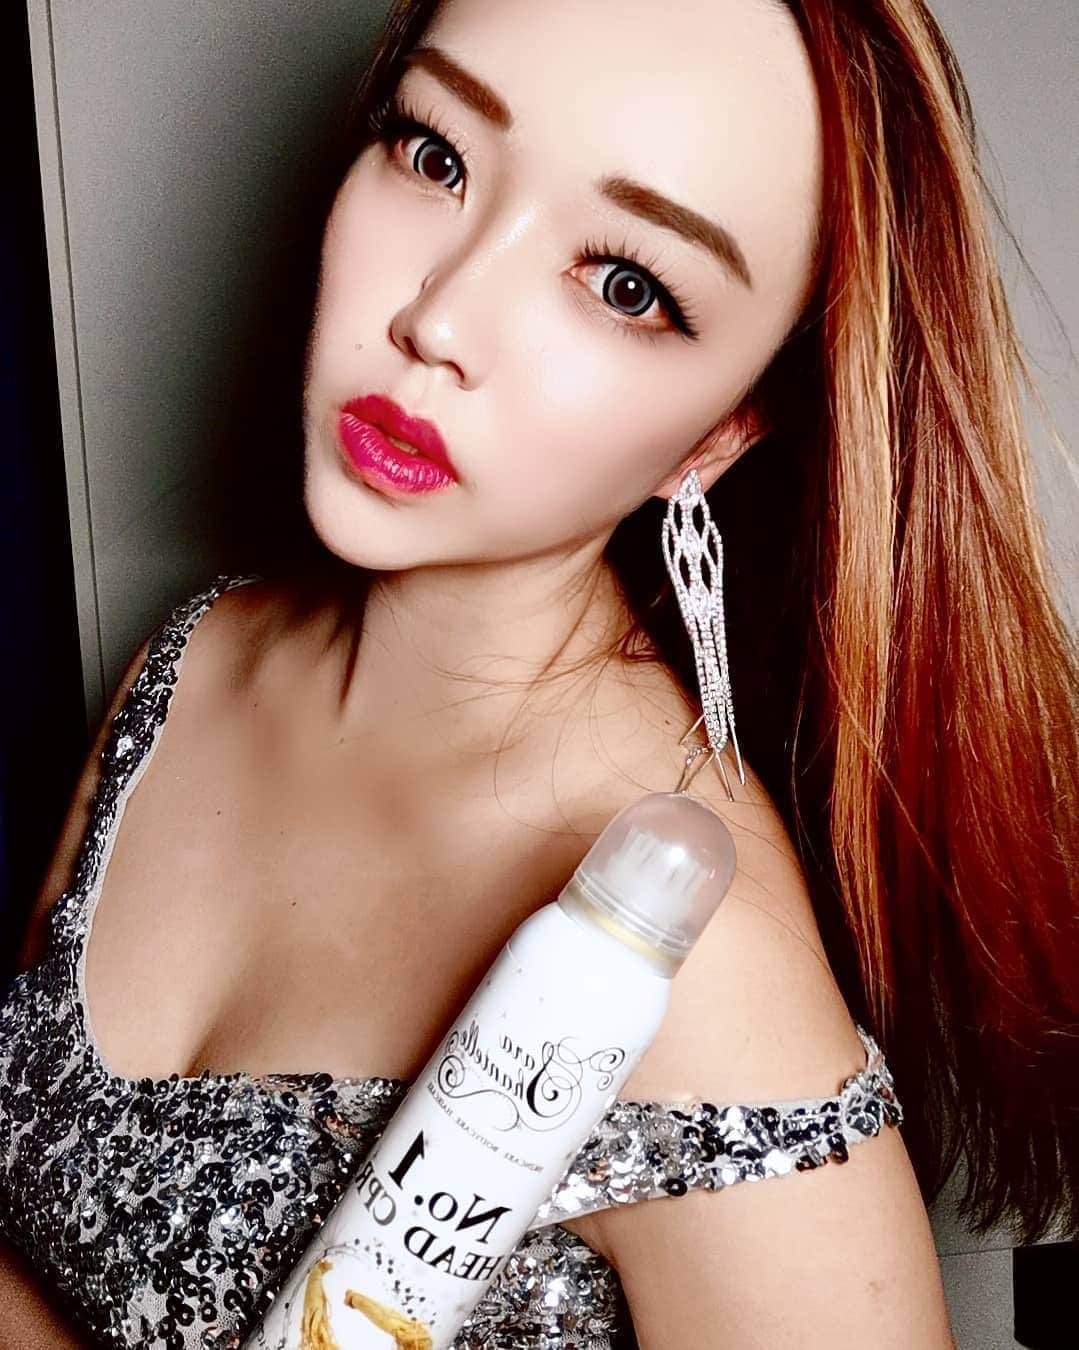 Nicole Chenさんのインスタグラム写真 - (Nicole ChenInstagram)「No.1 Head CPR Wild Ginseng Extracts Hair Tonic (made in USA) FDA & HSA APPROVED!! This wild ginseng extracts hair tonic is suitable for ALL Hair Types. Most Effective - Sensitive, Itchy, Troubled, Hair Loss, Bald Spots, Oily Scalps, Red Scalps.  BENEFITS - Promotes Hair Growth - Relieve Stress - Minty Sensation - Blood Circulation - Reduce Hair Itchiness - Anti Inflammatory - Eases Headaches & Migraines - Achieve PH Balance - Anti Dandruff - HBOT Oxygen Therapy  INGREDIENTS Highlights  Wild Ginseng Extracts - Natural TCM herbs to stimulate Hair Growth  Hyperbaric Oxygen Therapy (HBOT) - Medical use of Oxygen at a level higher than atmospheric pressure  Mint Extracts - Reduce Itchiness, Inflammation and Pain  Verbena Officinalis - Strengthens the Nervous System - Relaxing any Tension and Stress - Ease Depression and Melancholia  Hamamelis Witch Hazel - Hydration for the Scalp - Anti Oxidant  Rose Extract - Relaxing and Soothing effect on the Scalp  Bergamot - Aids Skin - Antiseptic Properties  Used by professional hair stylist and salons for over 10 years. It is now available for individual use at home!  How to use? - Pump 5 to 10 shots of ginseng extracts into different parts of your hair, massage it, leave it to dry. Recommended for use twice daily, day and night, for serious hair loss and itchy scalp issues. This is used after you wash and dry your hair. It is a leave in hair tonic. Shake the bottle well before use.  FDA USA APPROVED!! HSA SINGAPORE APPROVED!!! Get your HAIR GROWTH TREATMENT done at the comfort of your HOME!! At an Affordable Price!! Used by professional hair salons in Singapore, Indonesia and China. Don't need to waste thousands of $$$ at hair salons.. TEST 1 BOTTLE NOW! At only $79.  Singapore Standard Retail Price: $79.  Covid Promo (only May & June): $60 each!  Inbox Orders above $150 - Free Delivery!! NO Minimum Order. Test 1 bottle at $79nett.  P.S - If you would like to be OUR DISTRIBUTOR in Singapore or  #抖音#抖音有毒 #抖音上瘾 #抖音精选 #抖音短视频 #douyinvideos #uzzlang #korean #chinese #asian #tiktokchina  #uzzlangstyle #douyin #抖音日常 #抖音上癮 #抖音短視頻 #tiktok #douyinchina #小姐姐 #抖音🎵 #抖音短视频在线#情侣 #恋爱 #fashion」5月22日 21時15分 - nicolechen.tv